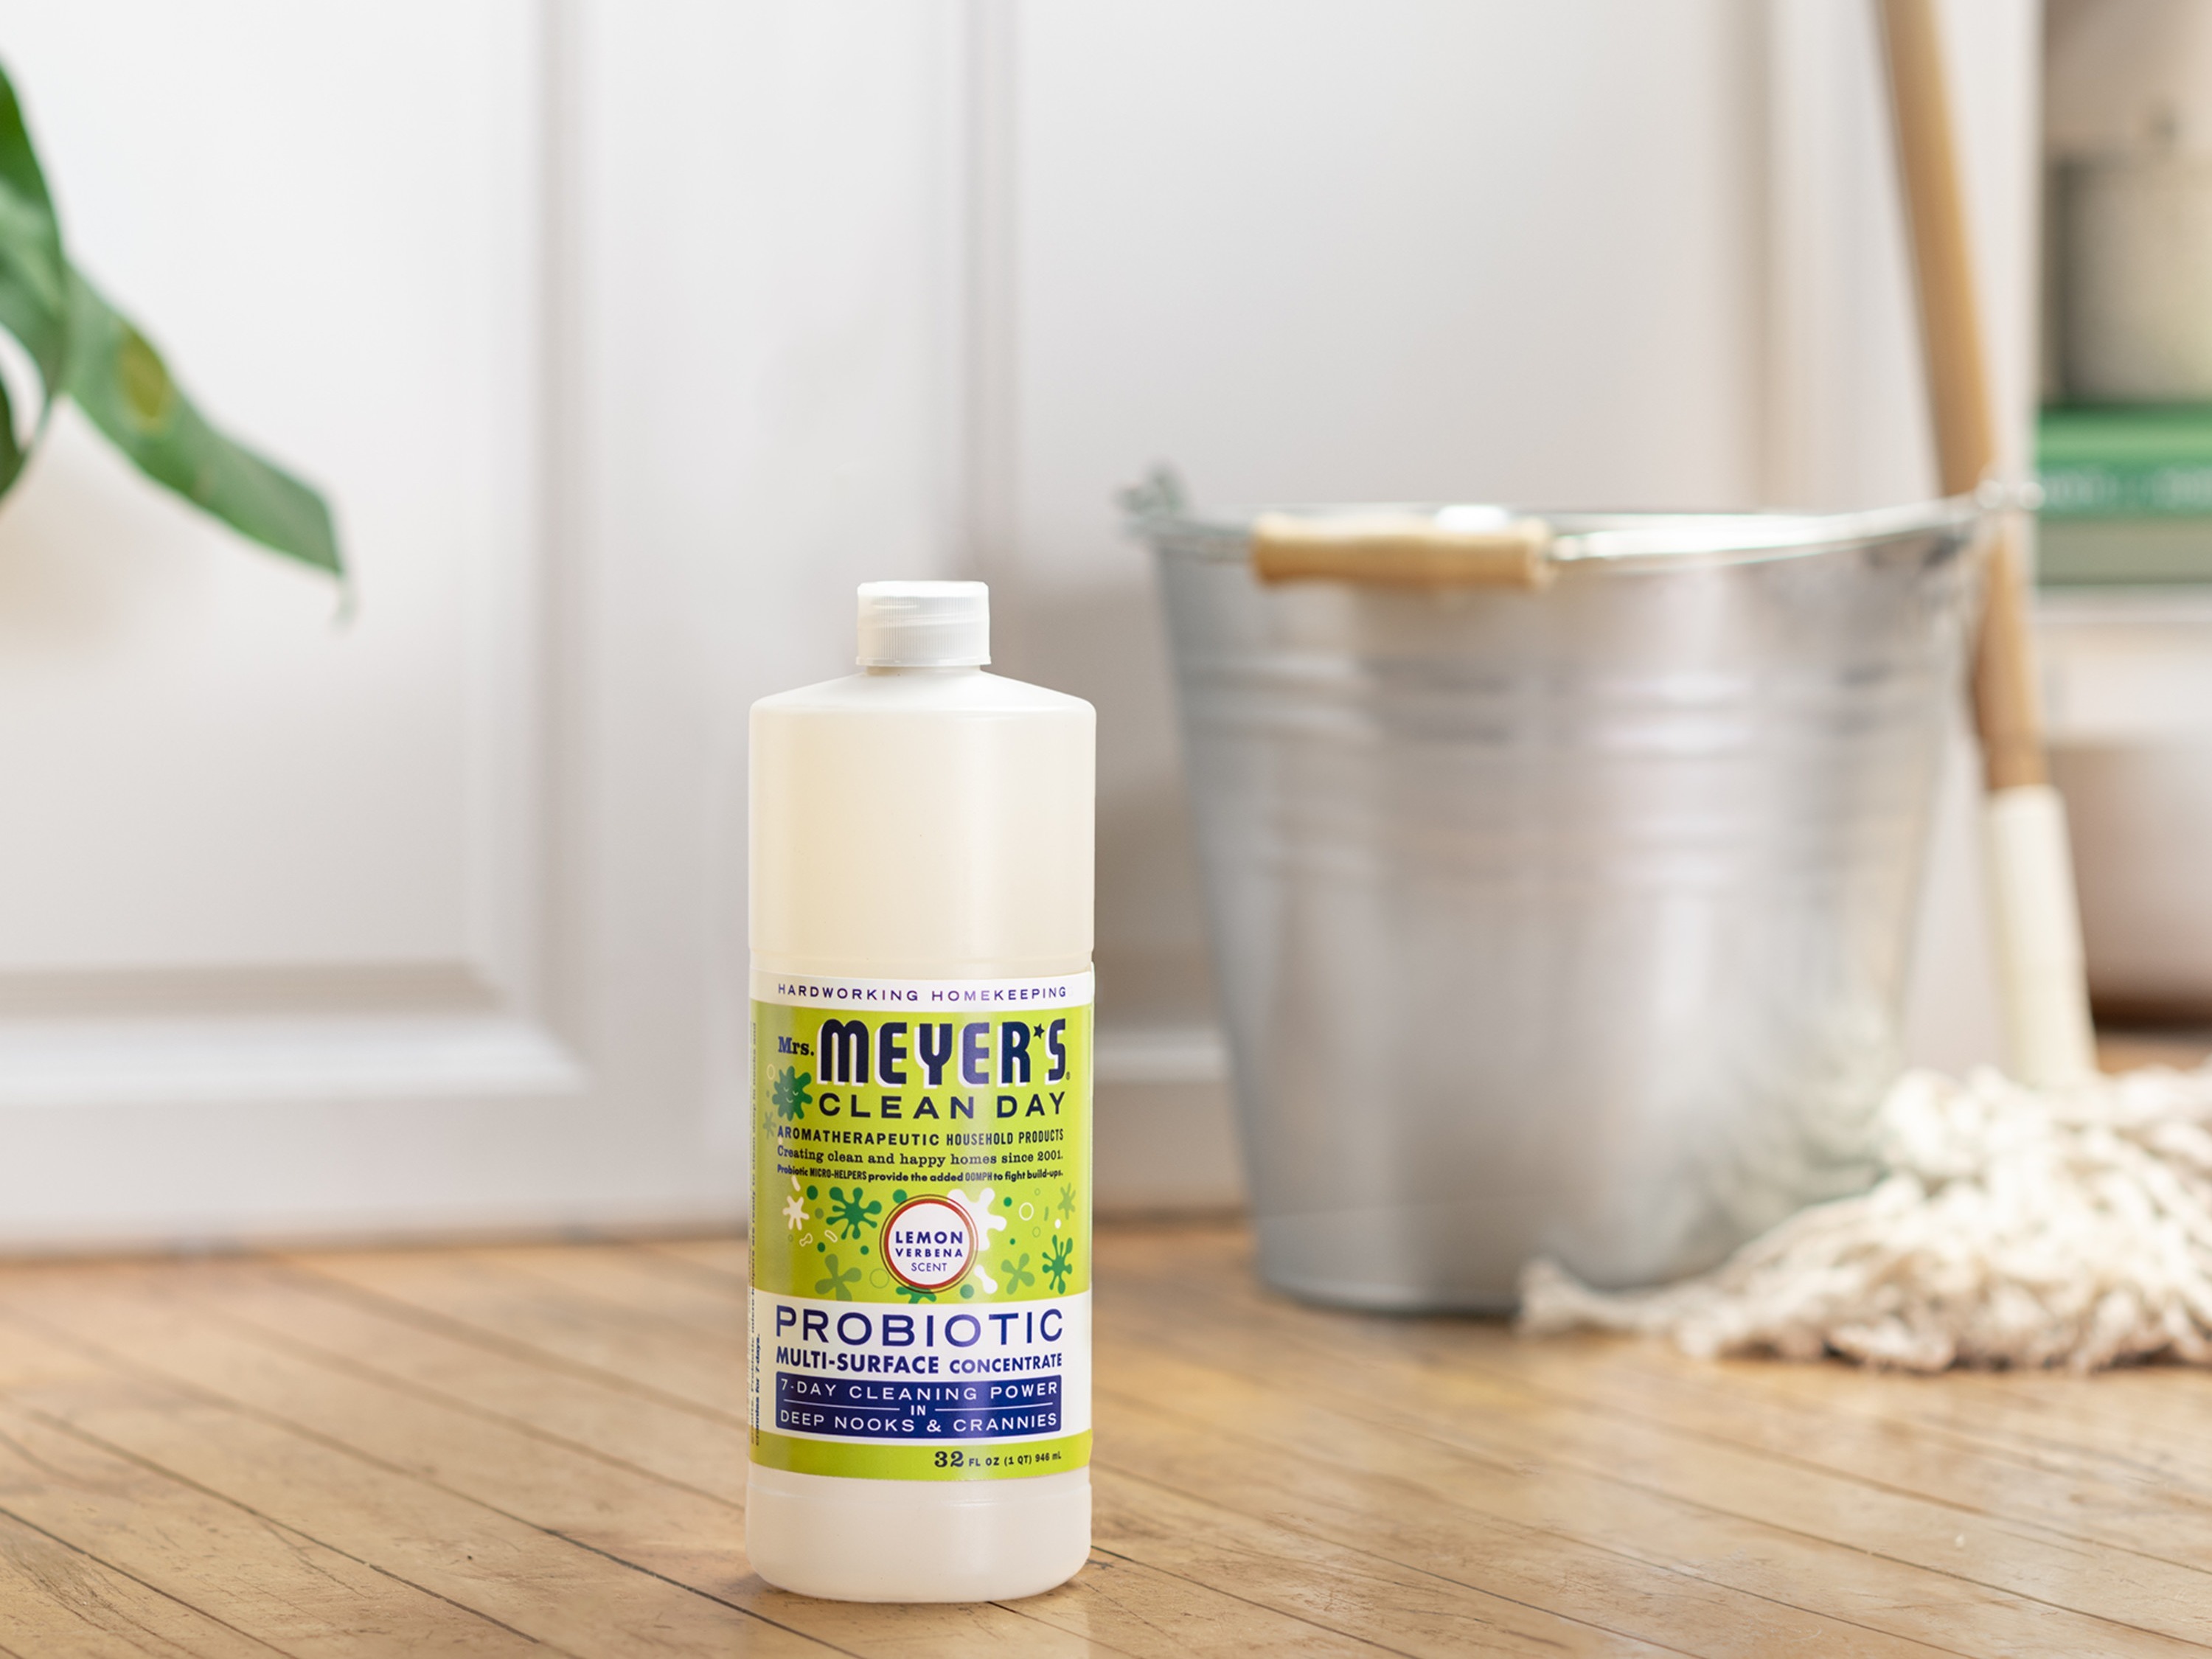 mrs meyers probiotic floor cleaner on wood floor by a mop and bucket